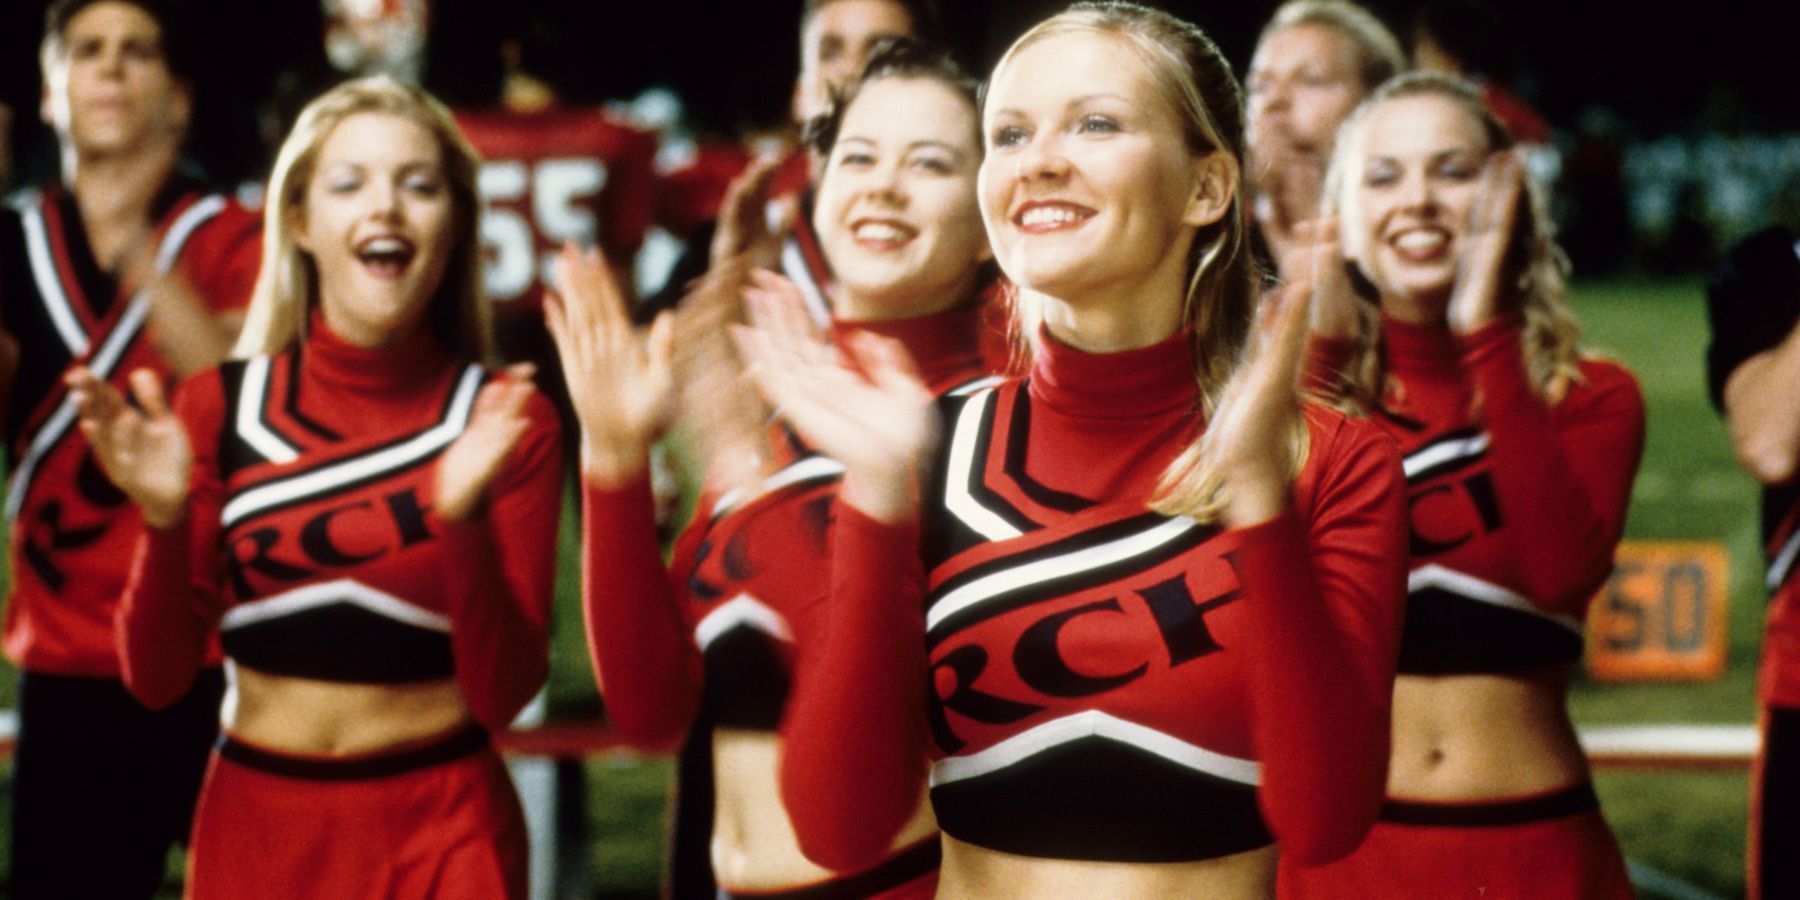 The Toros cheer at a football game in Bring It On